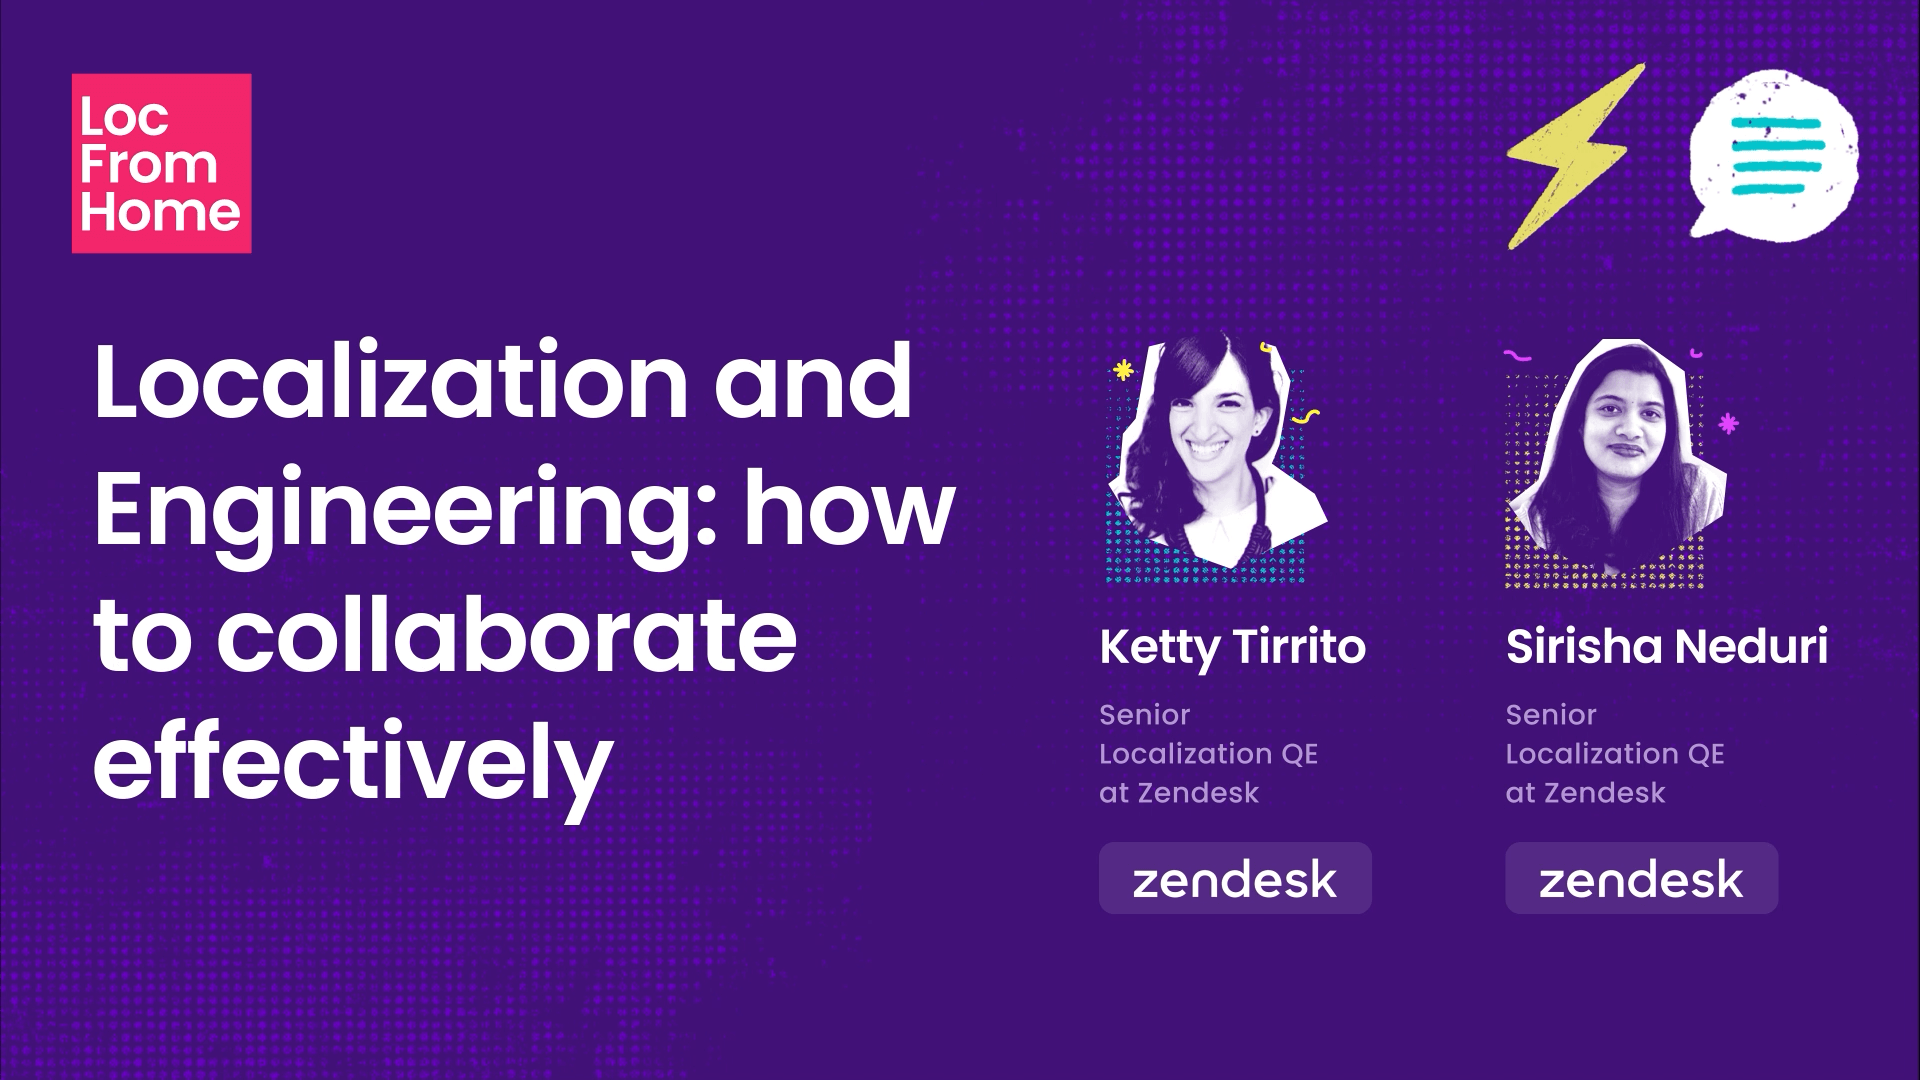 Localization, Product & Engineering: The Zendesk approach